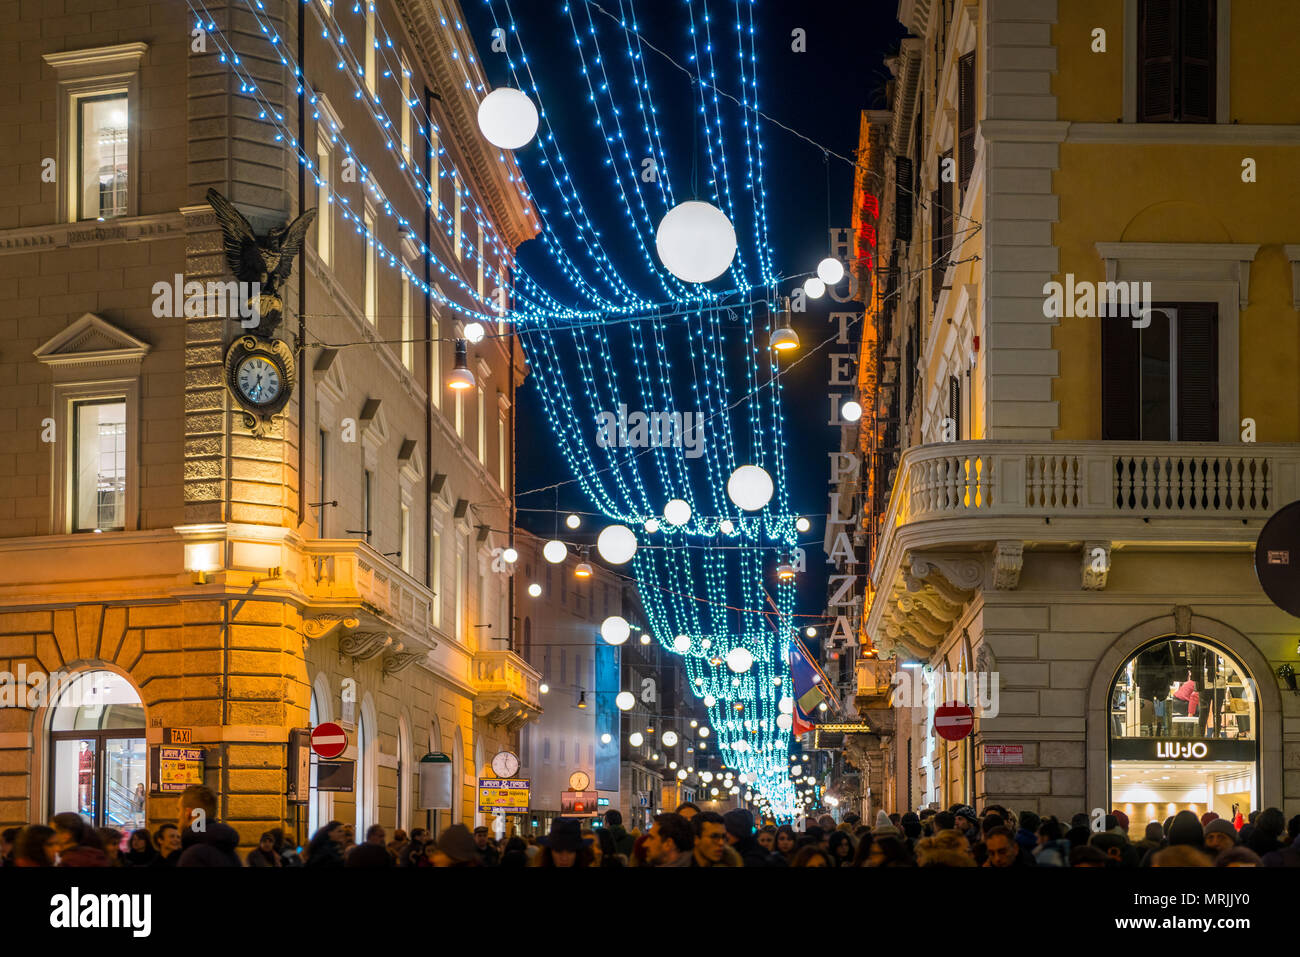 Via del Corso in Rome during Christmas time. Italy Stock Photo